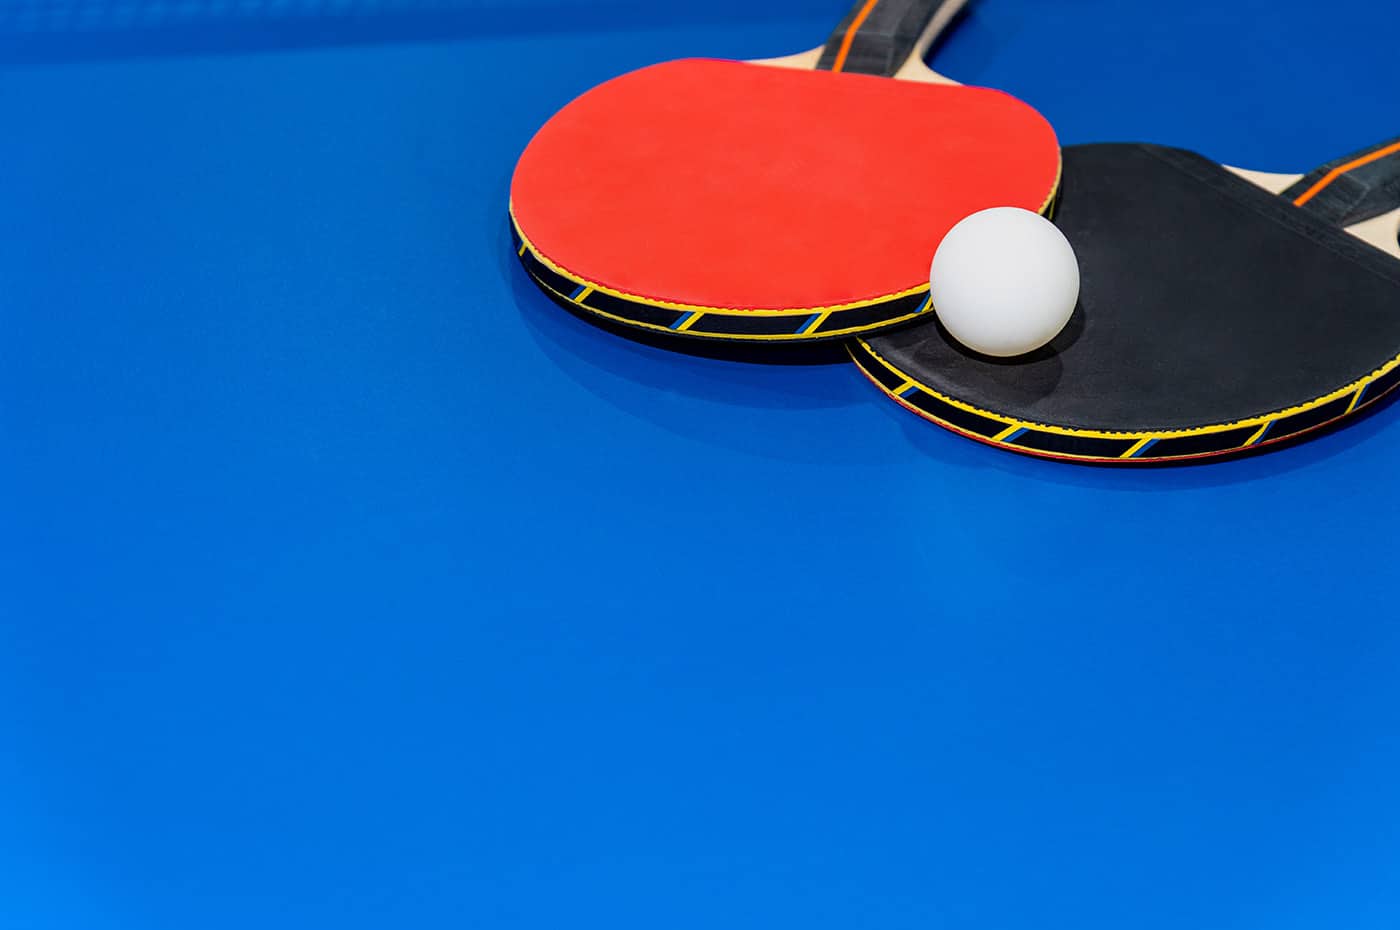 Black And Red Table Tennis Racket